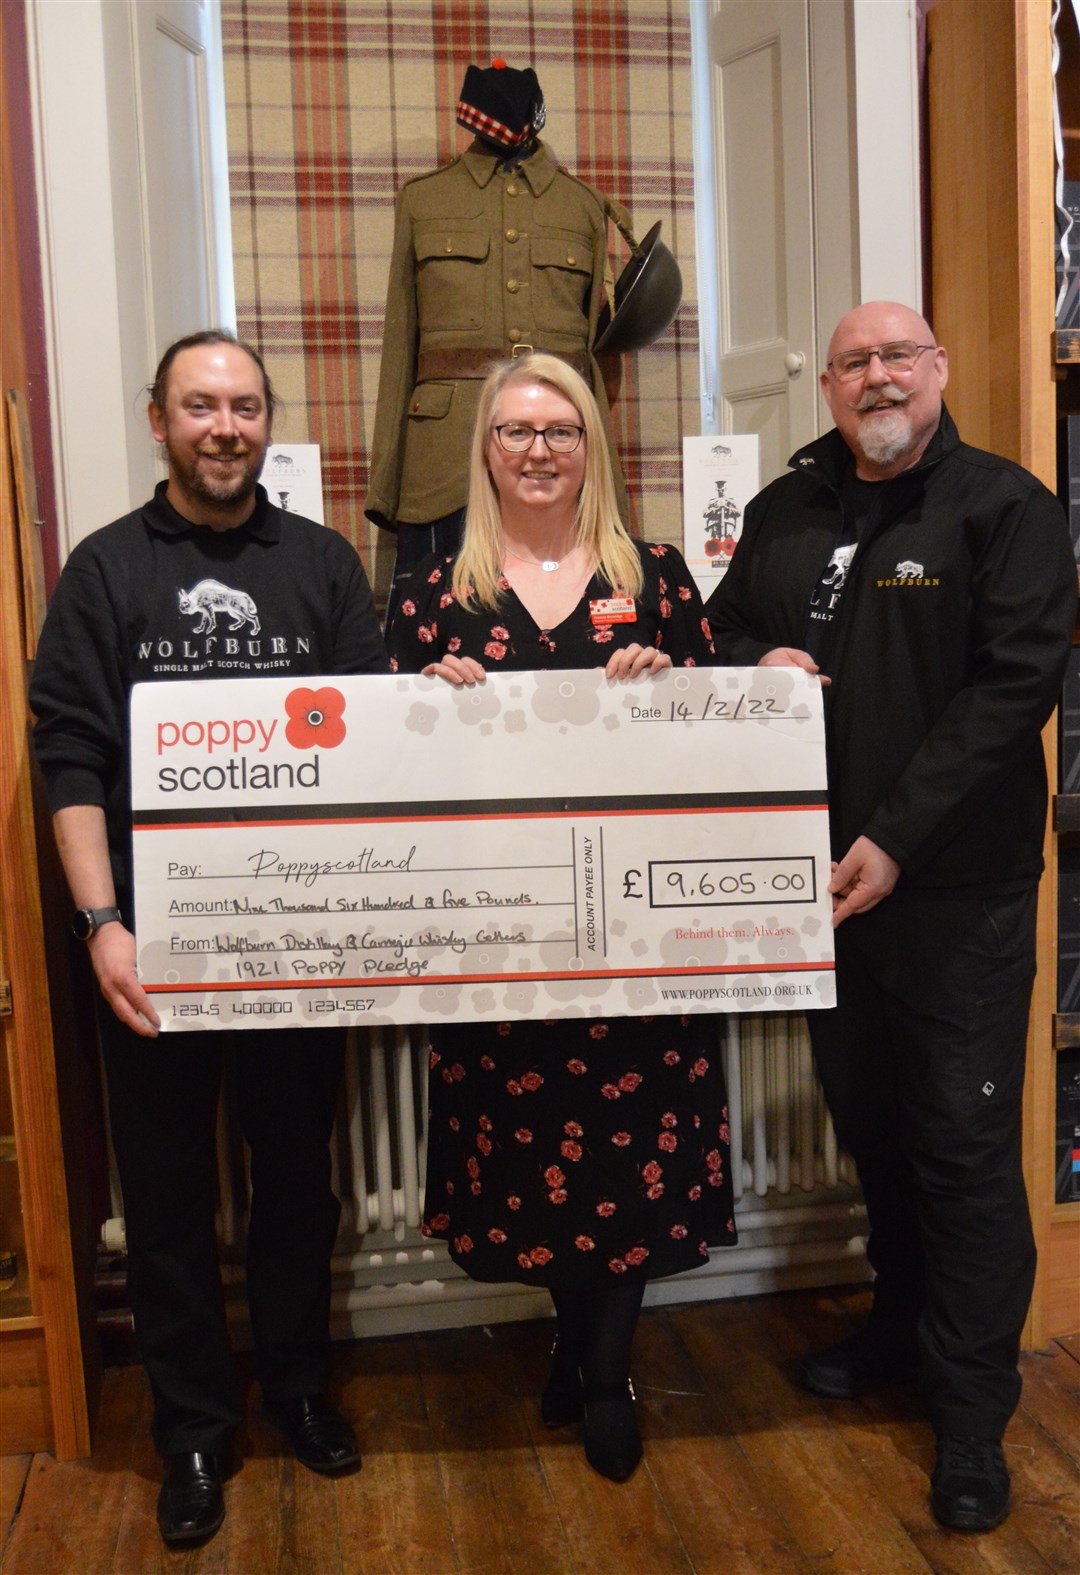 The cheque for £9605 was handed over to Frances Beveridge (centre) by Michael Hanratty (left) and Mark Westmorland.